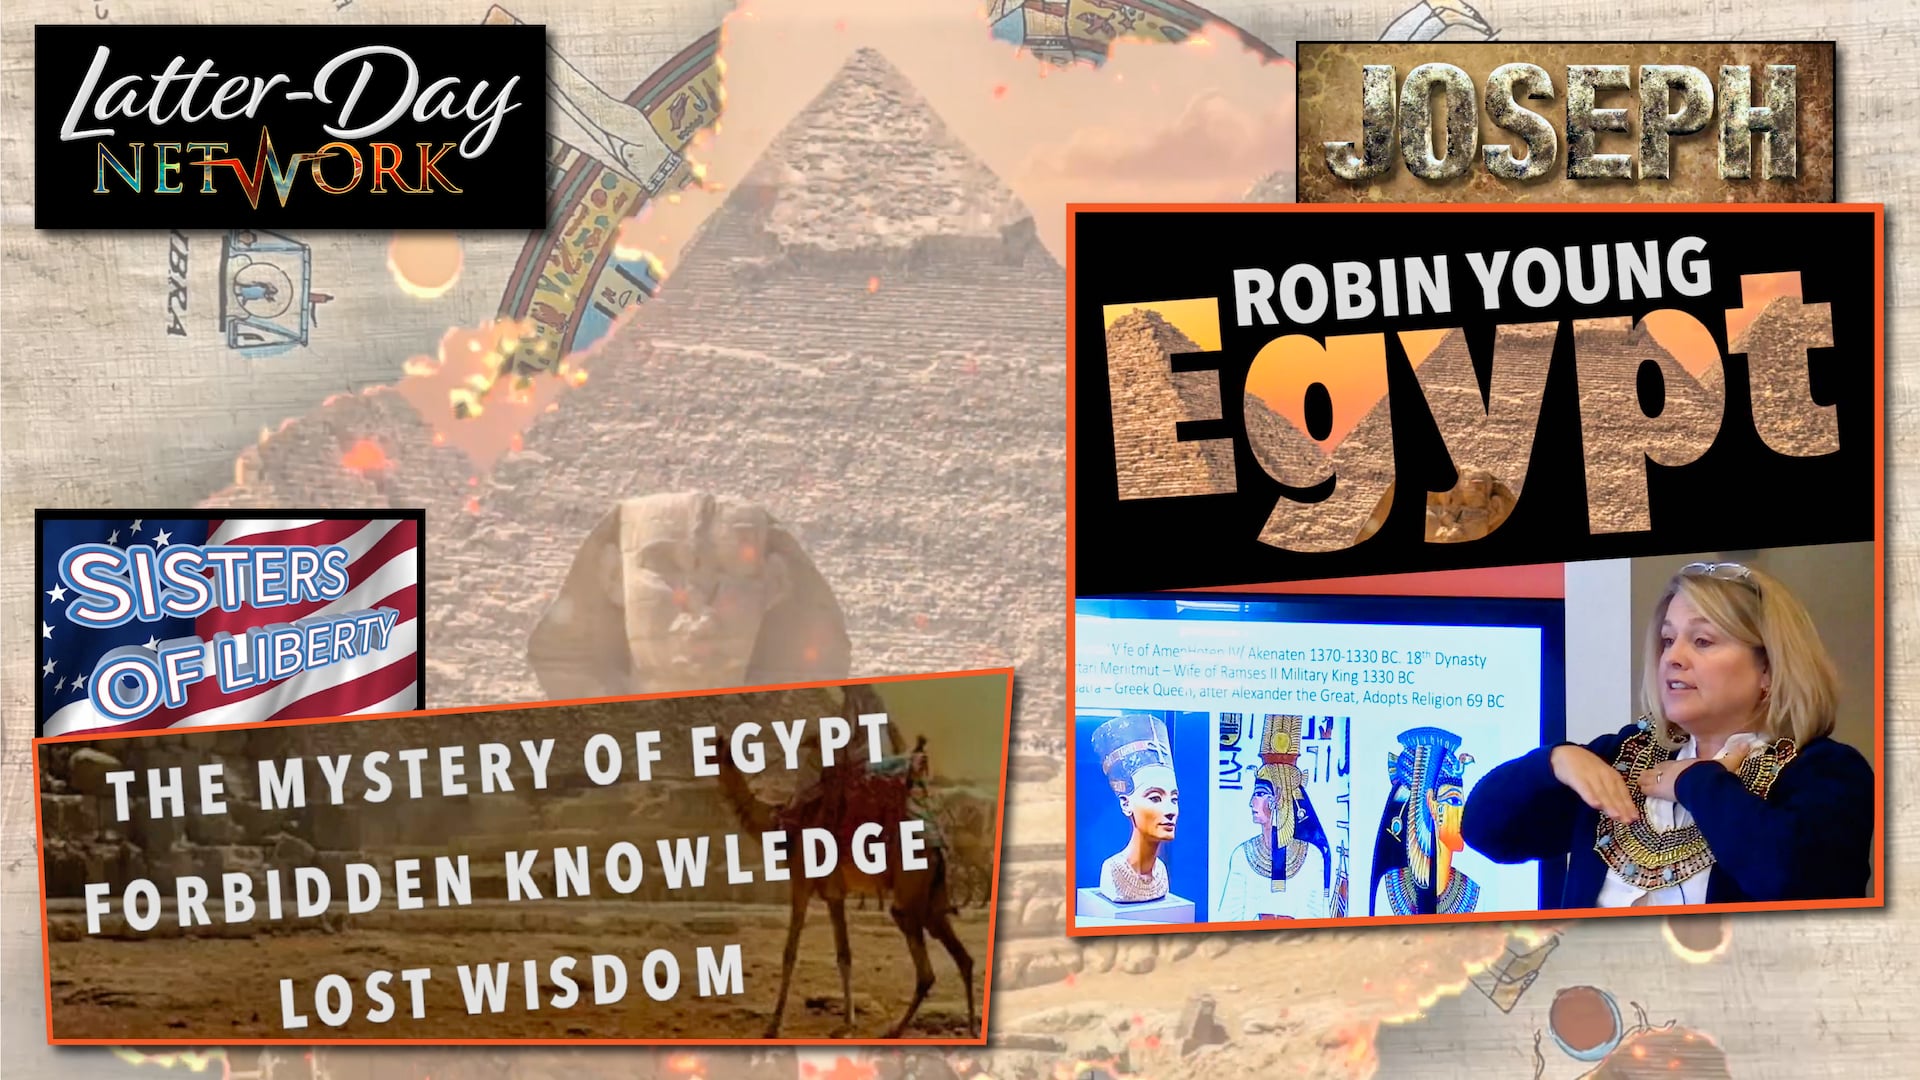 The Mystery of Egypt Forbidden Knowledge Lost Wisdom - Robin Young at Sisters of Liberty